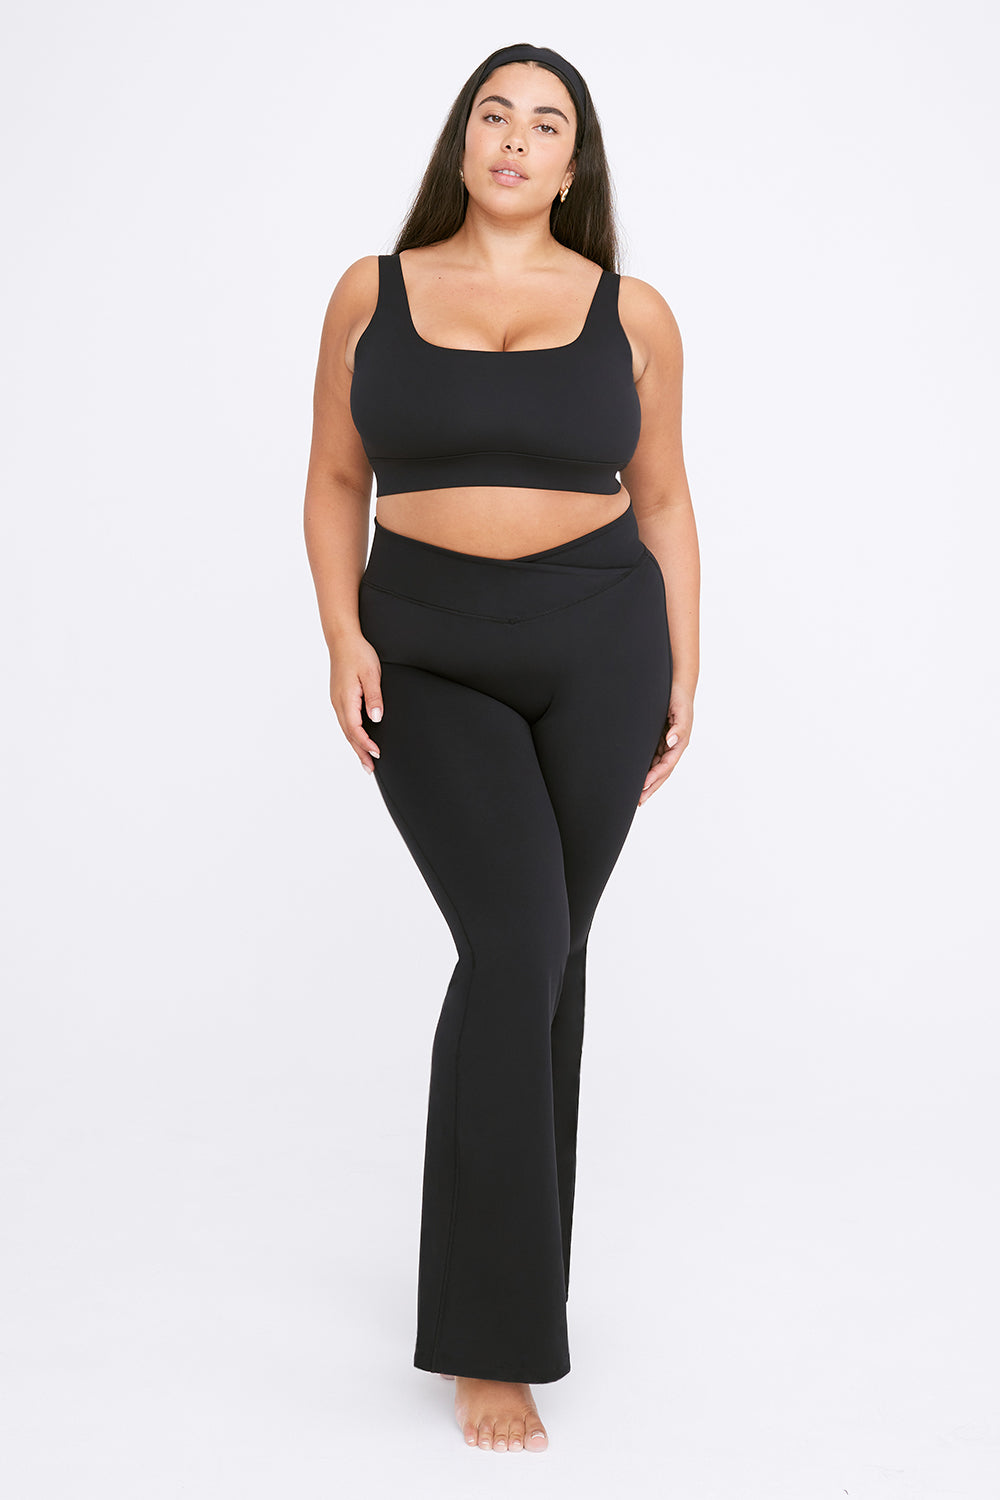 Best Plus Size Workout Clothes and Activewear - My Curves And Curls